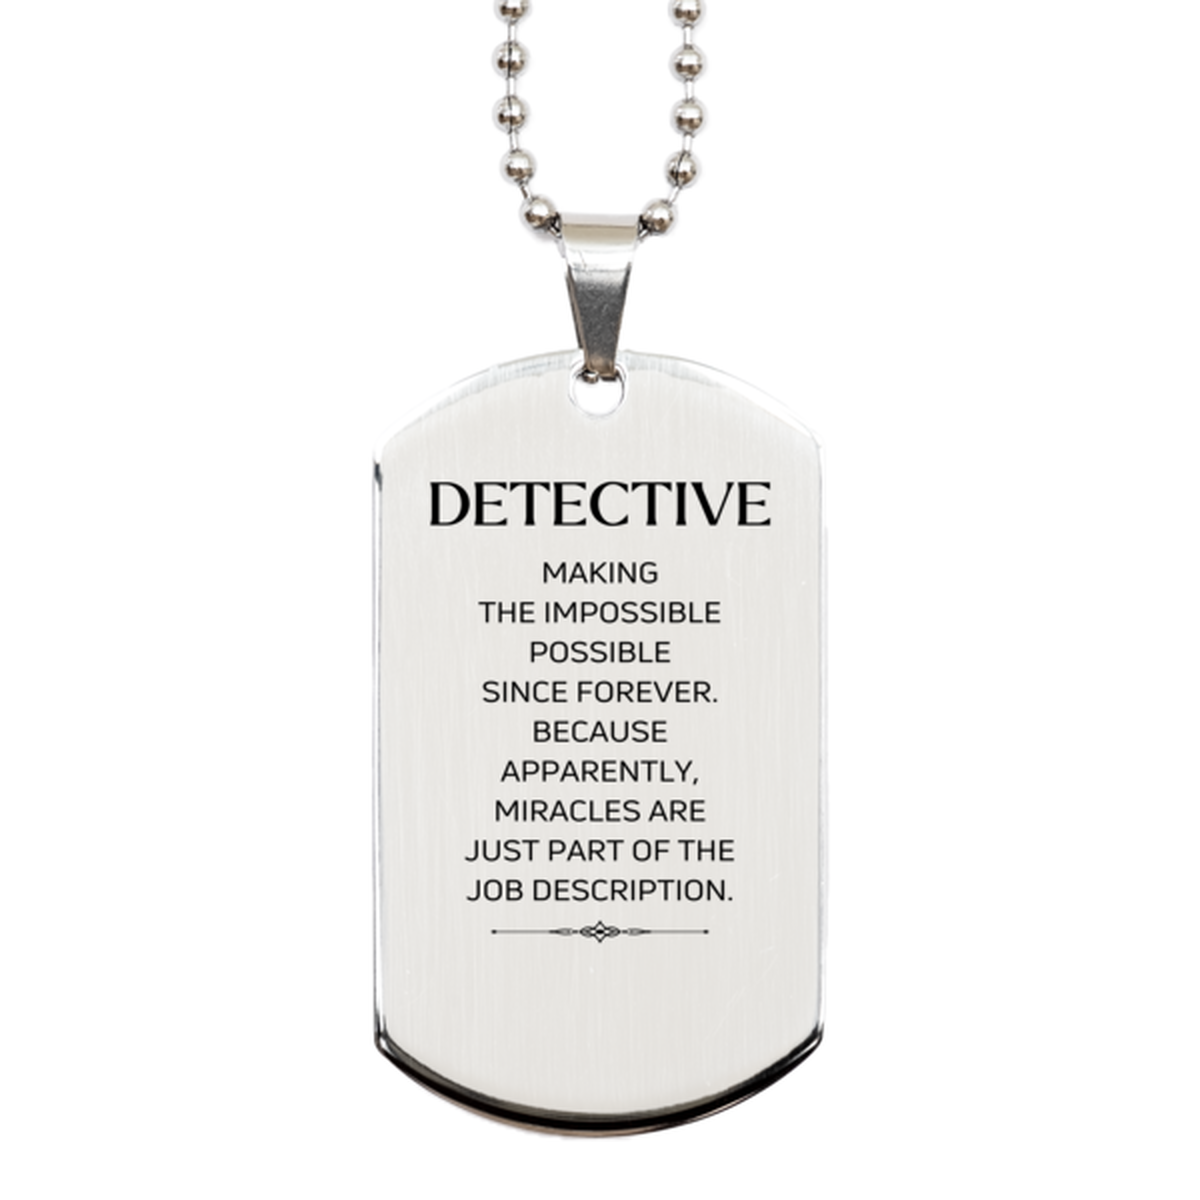 Funny Detective Gifts, Miracles are just part of the job description, Inspirational Birthday Silver Dog Tag For Detective, Men, Women, Coworkers, Friends, Boss